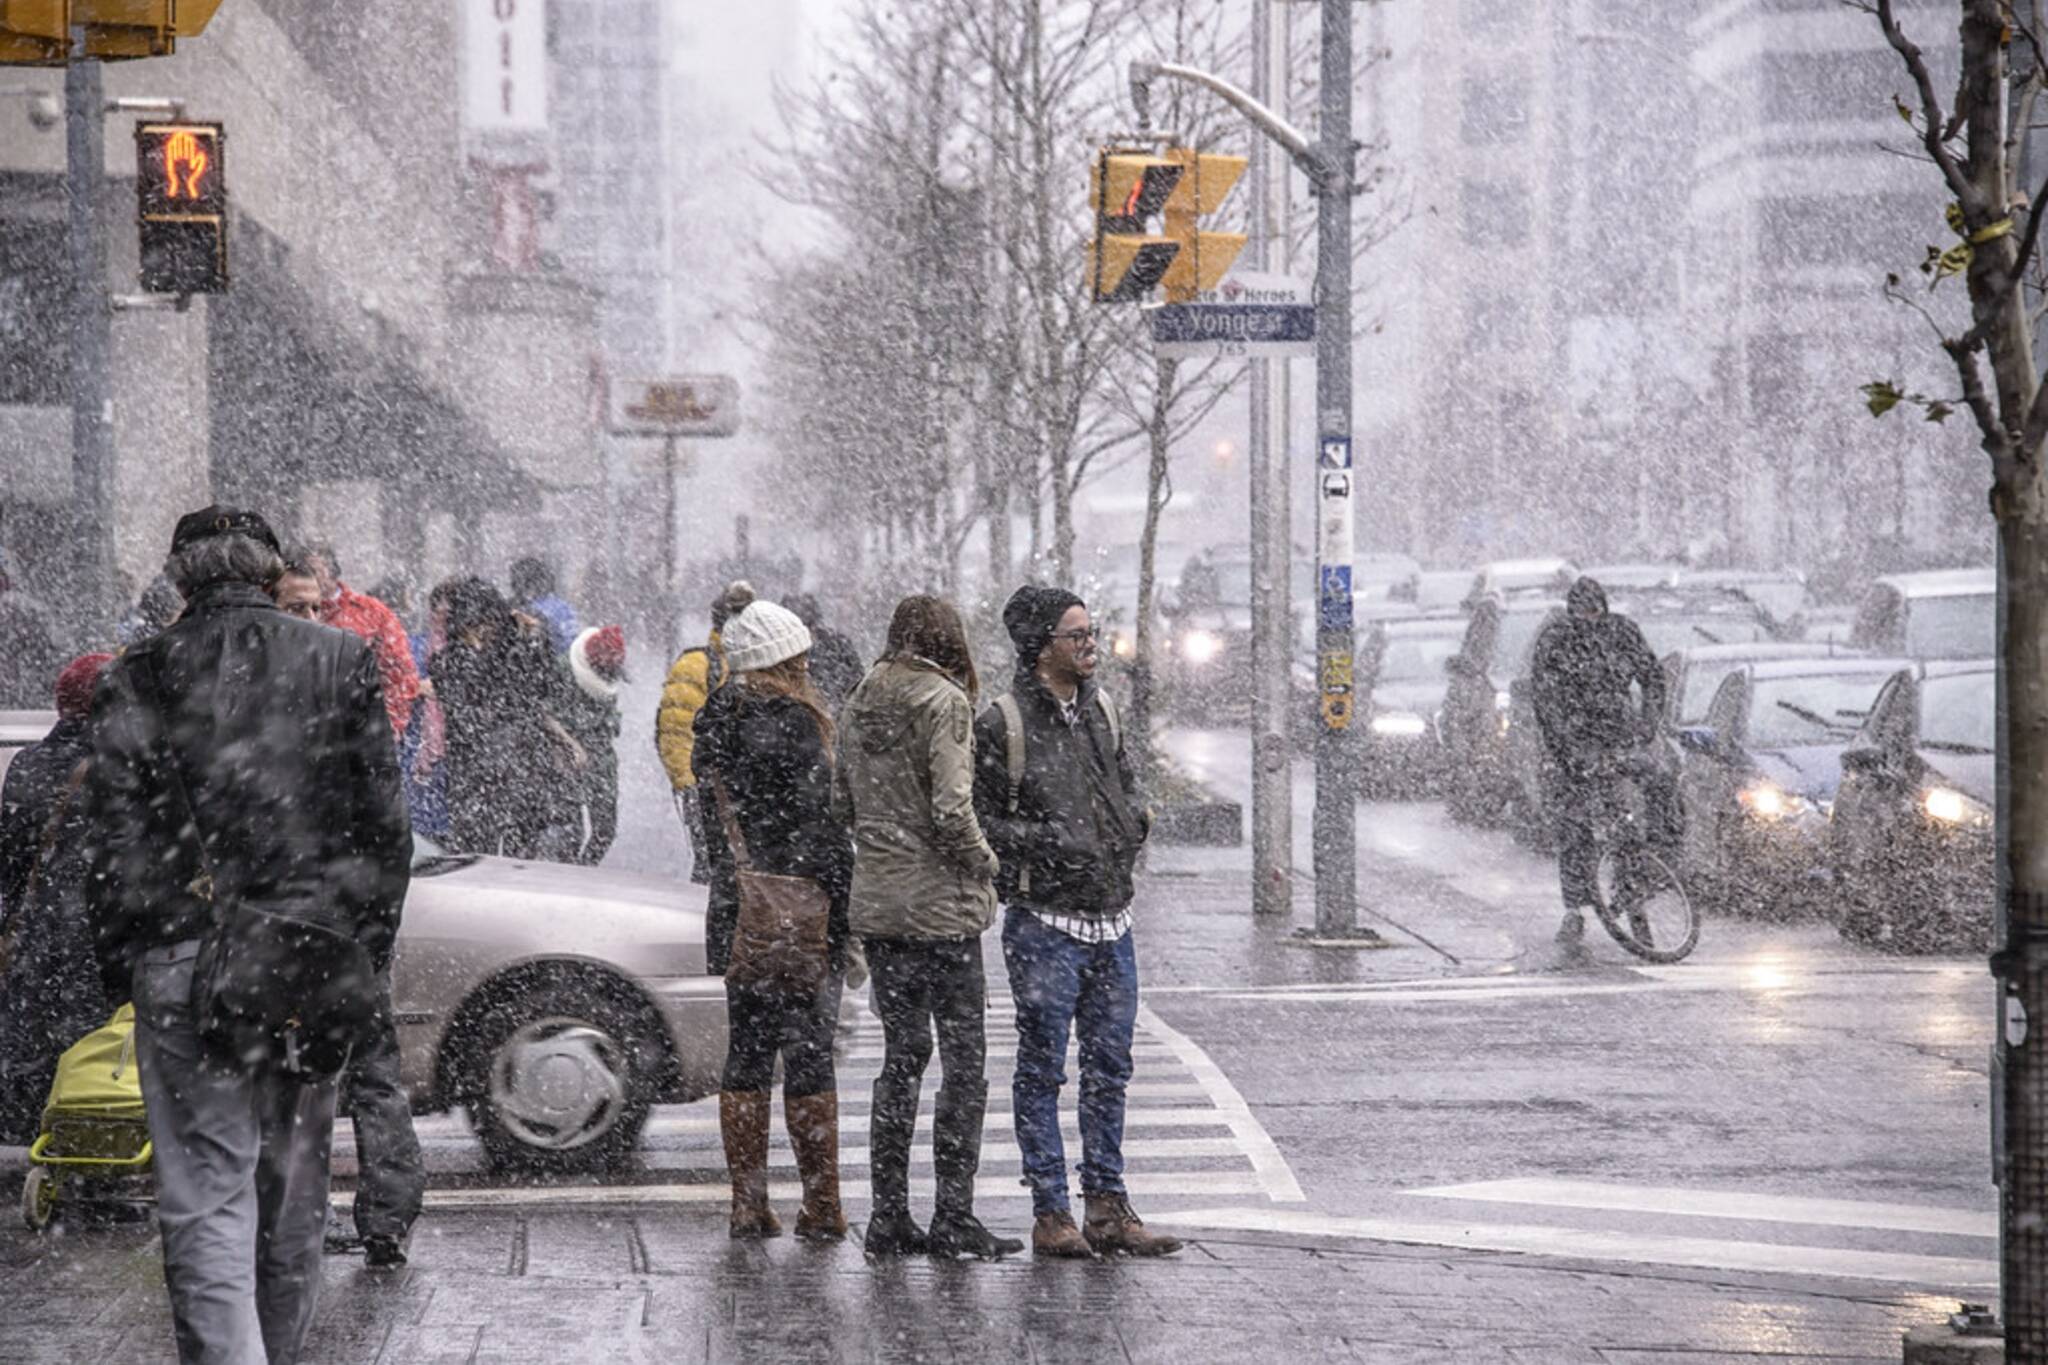 Toronto could see its first snowfall of the season this weekend